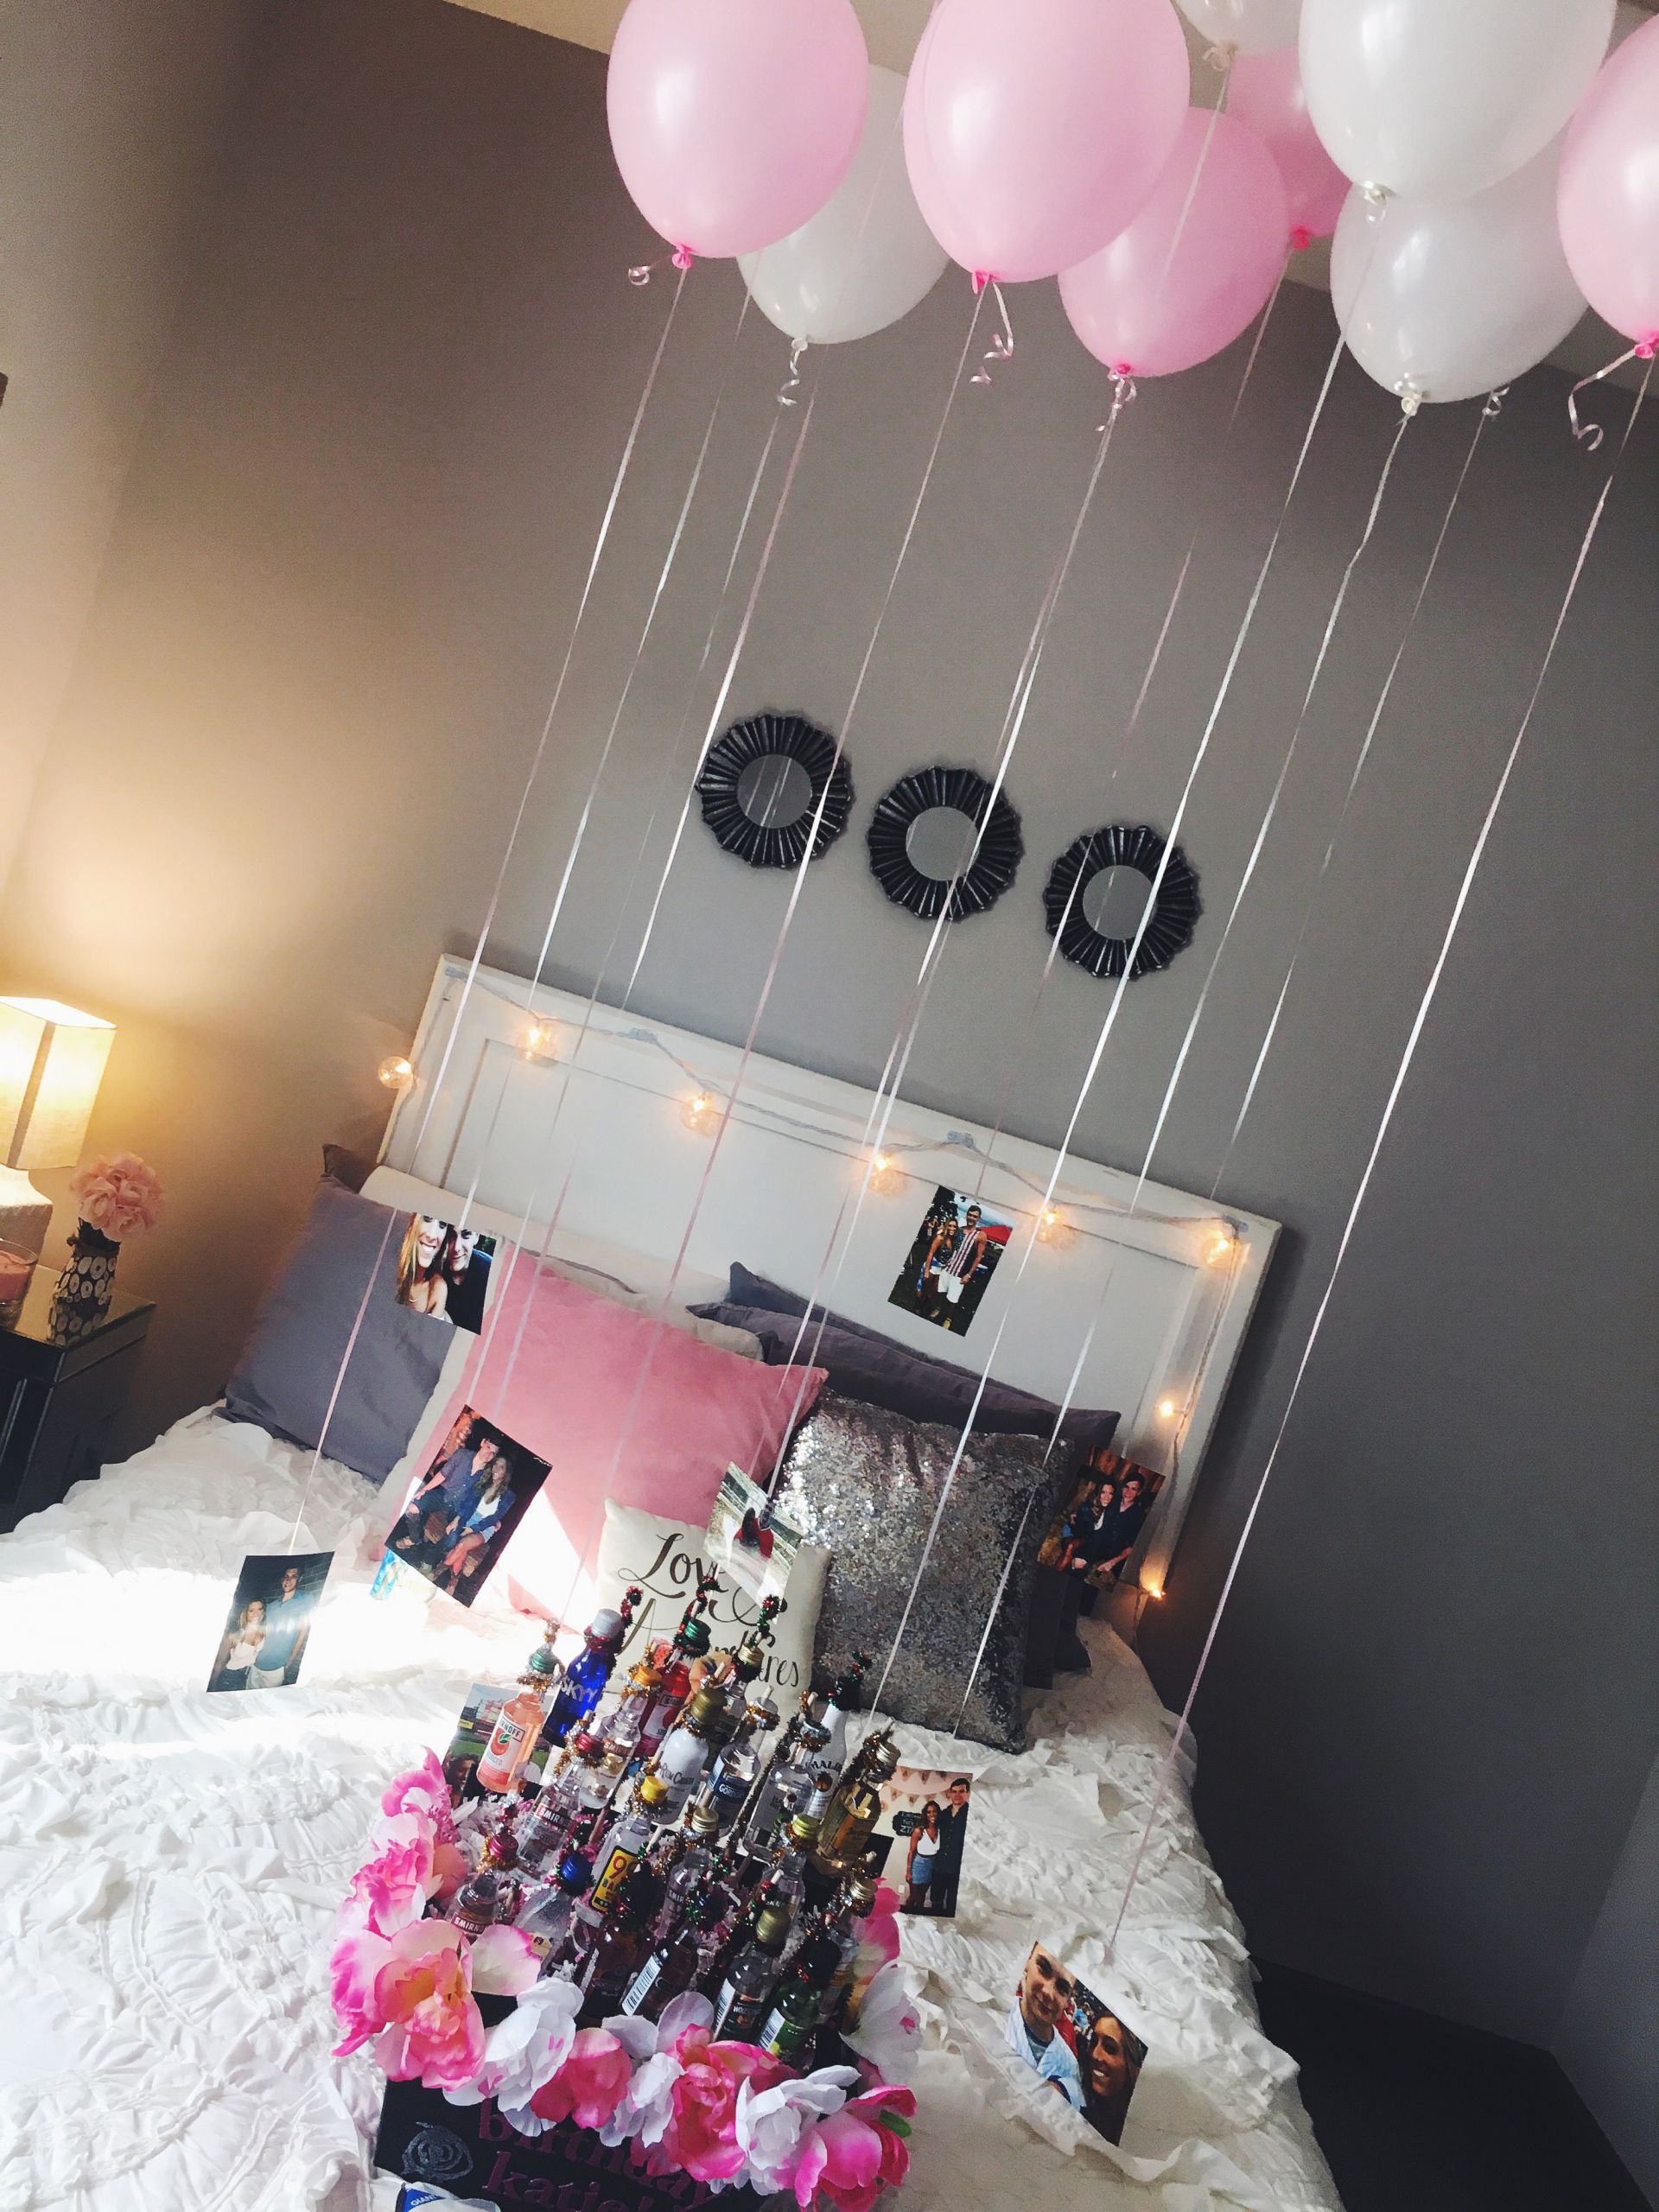 Gift Ideas For My Girlfriends Birthday
 easy and cute decorations for a friend or girlfriends 21st